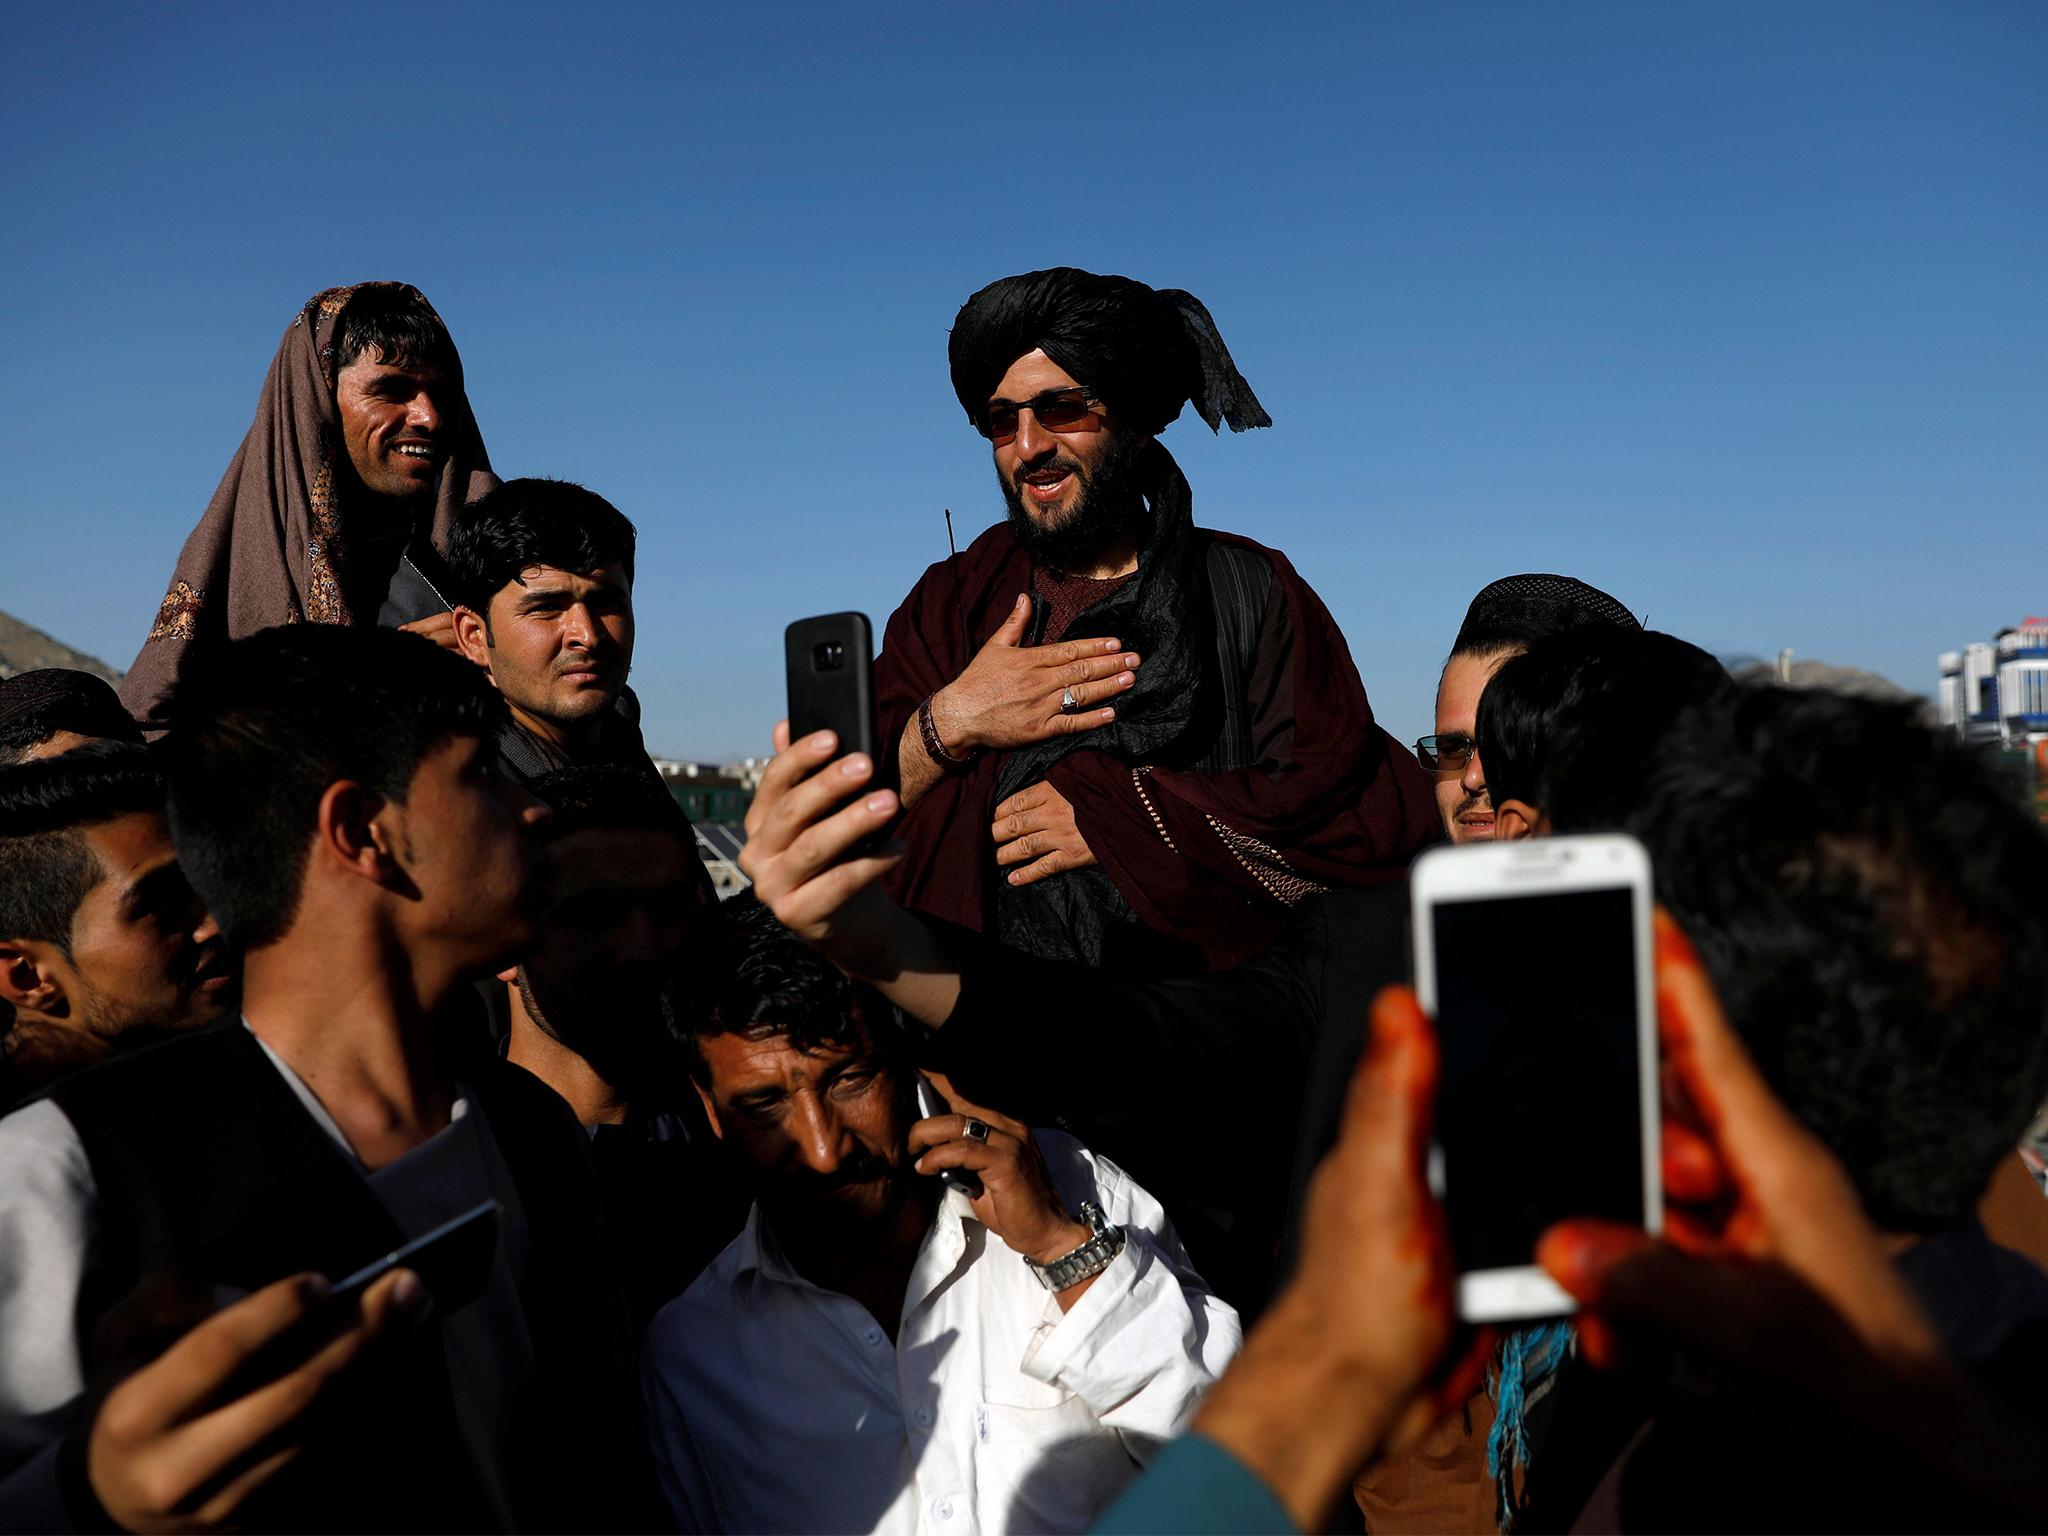 People take selfies with a Taliban fighter in Kabul during the Eid ceasefire